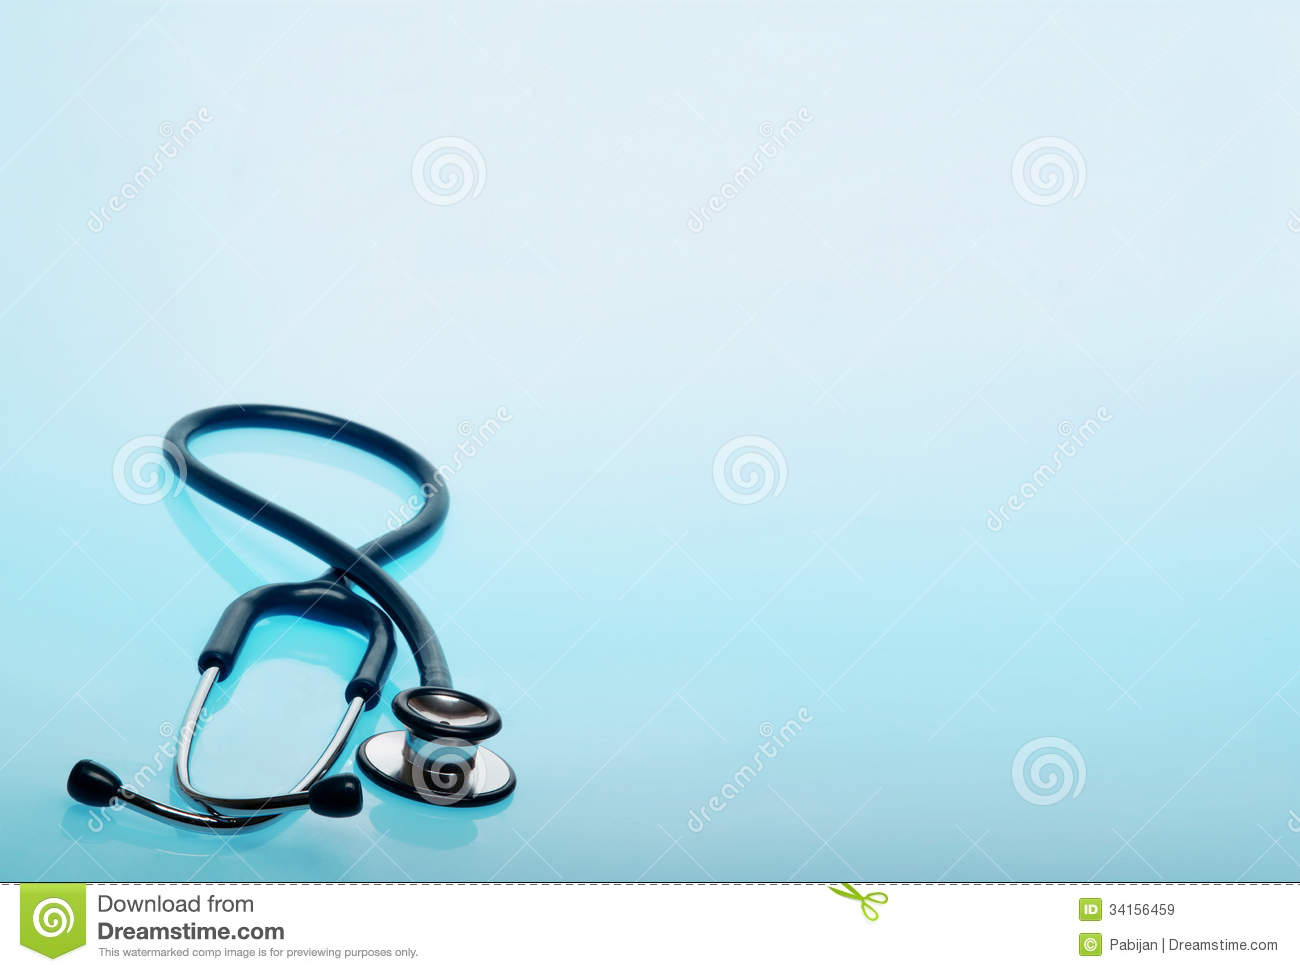 medical backgrounds for powerpoint